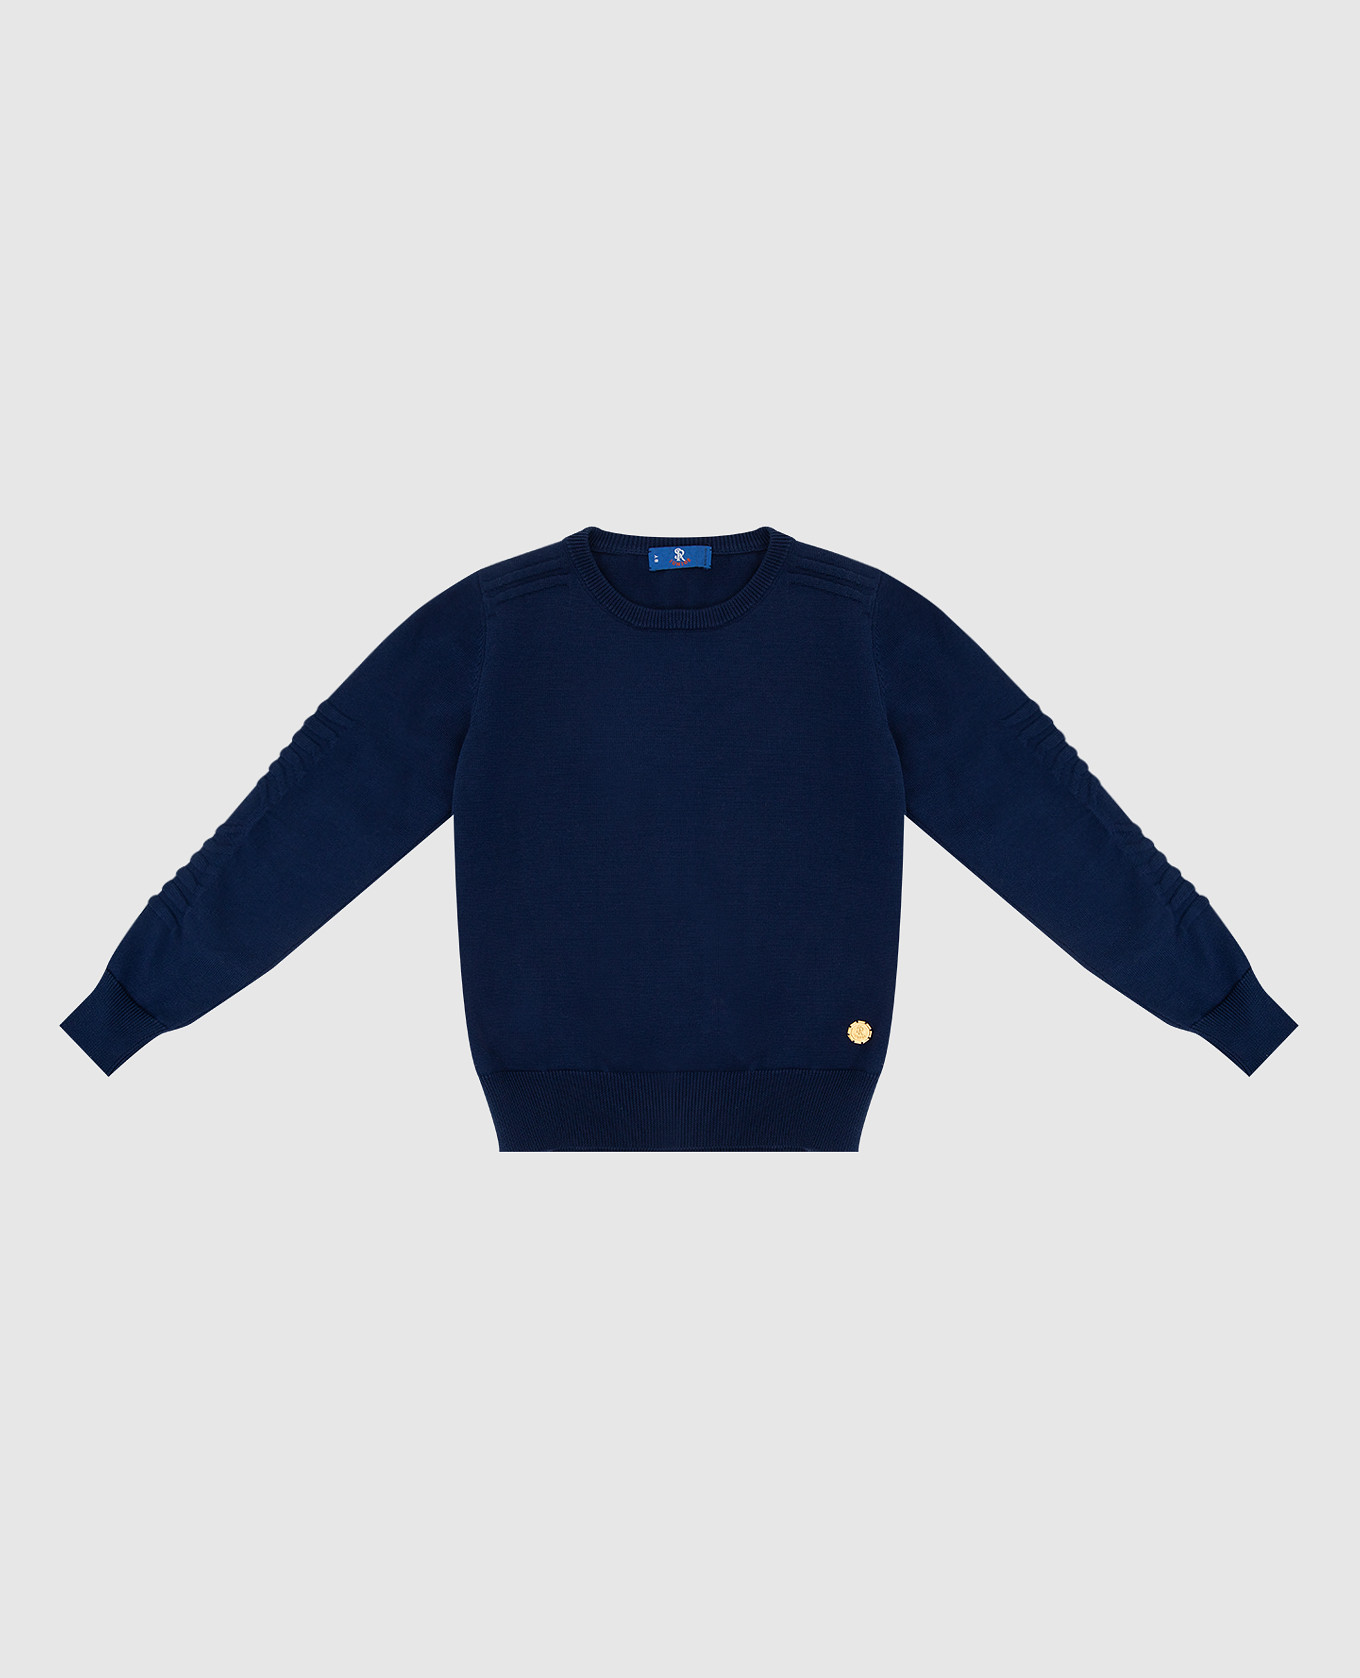 Children's blue sweater with a pattern